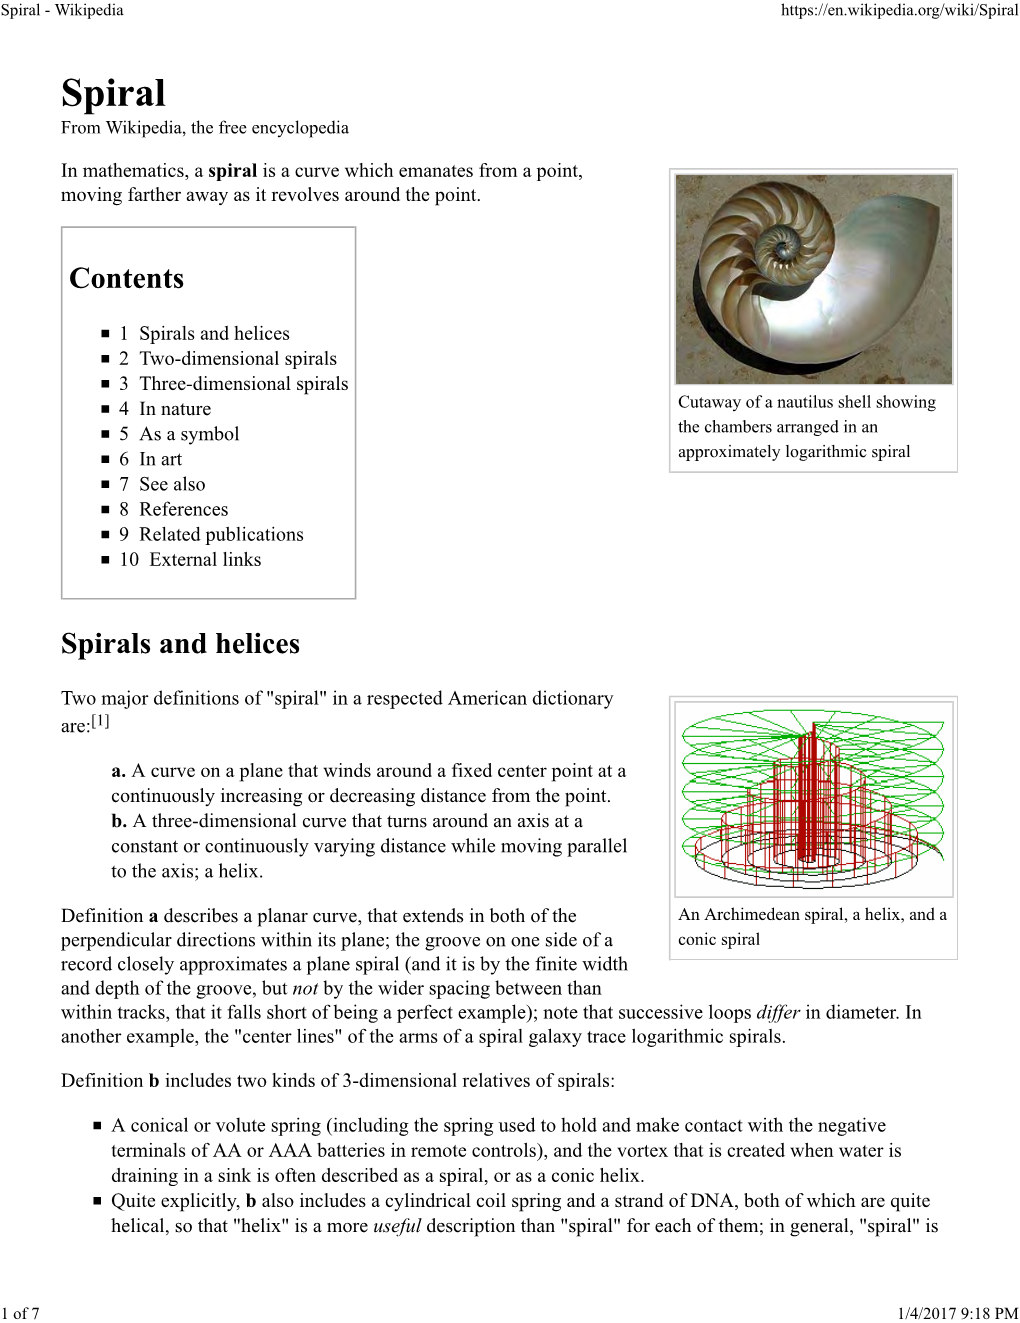 In Mathematics, a Spiral Is a Curve Which Emanates from a Point, Moving Farther Away As It Revolves Around the Point